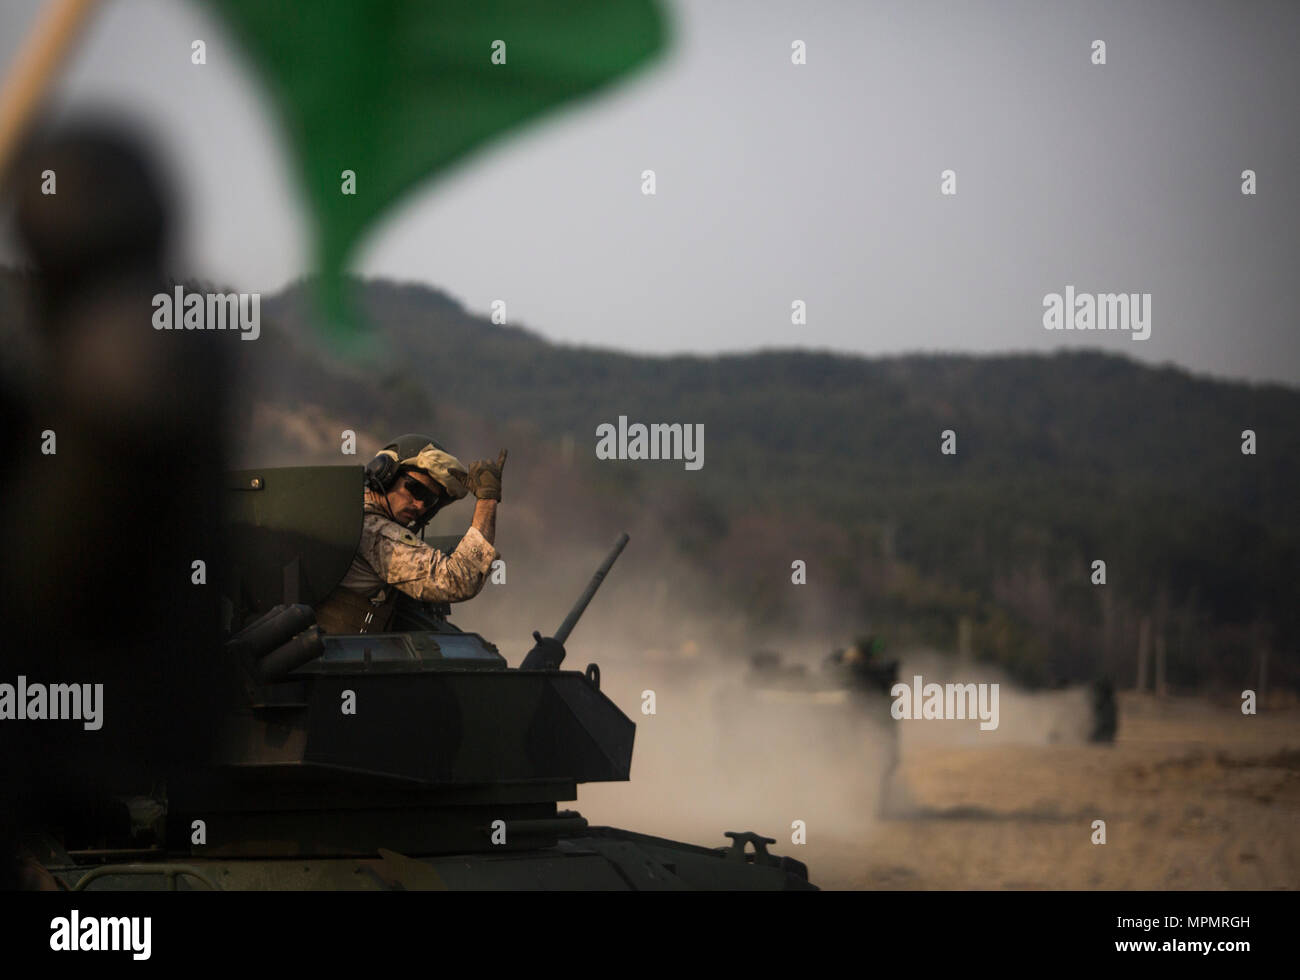 Sgt. Joshua Kelly signals for the next assault amphibious vehicle to follow him after live fire drills, March 28, 2017, at Susong Ri live fire range, Republic of Korea, during Korea Marine Exercise Program 17-6. The KMEP series of exercises continually evolves to maintain the highest level of readiness in defense of ROK through realistic training. Kelly, a Victoria, Texas, native is a crew chief with Company C, 4th Assault Amphibian Battalion. The company, a reserve unit based out of Galveston, Texas, is currently supporting Combat Assault Battalion, 3rd Marine Division, III Marine Expeditiona Stock Photo